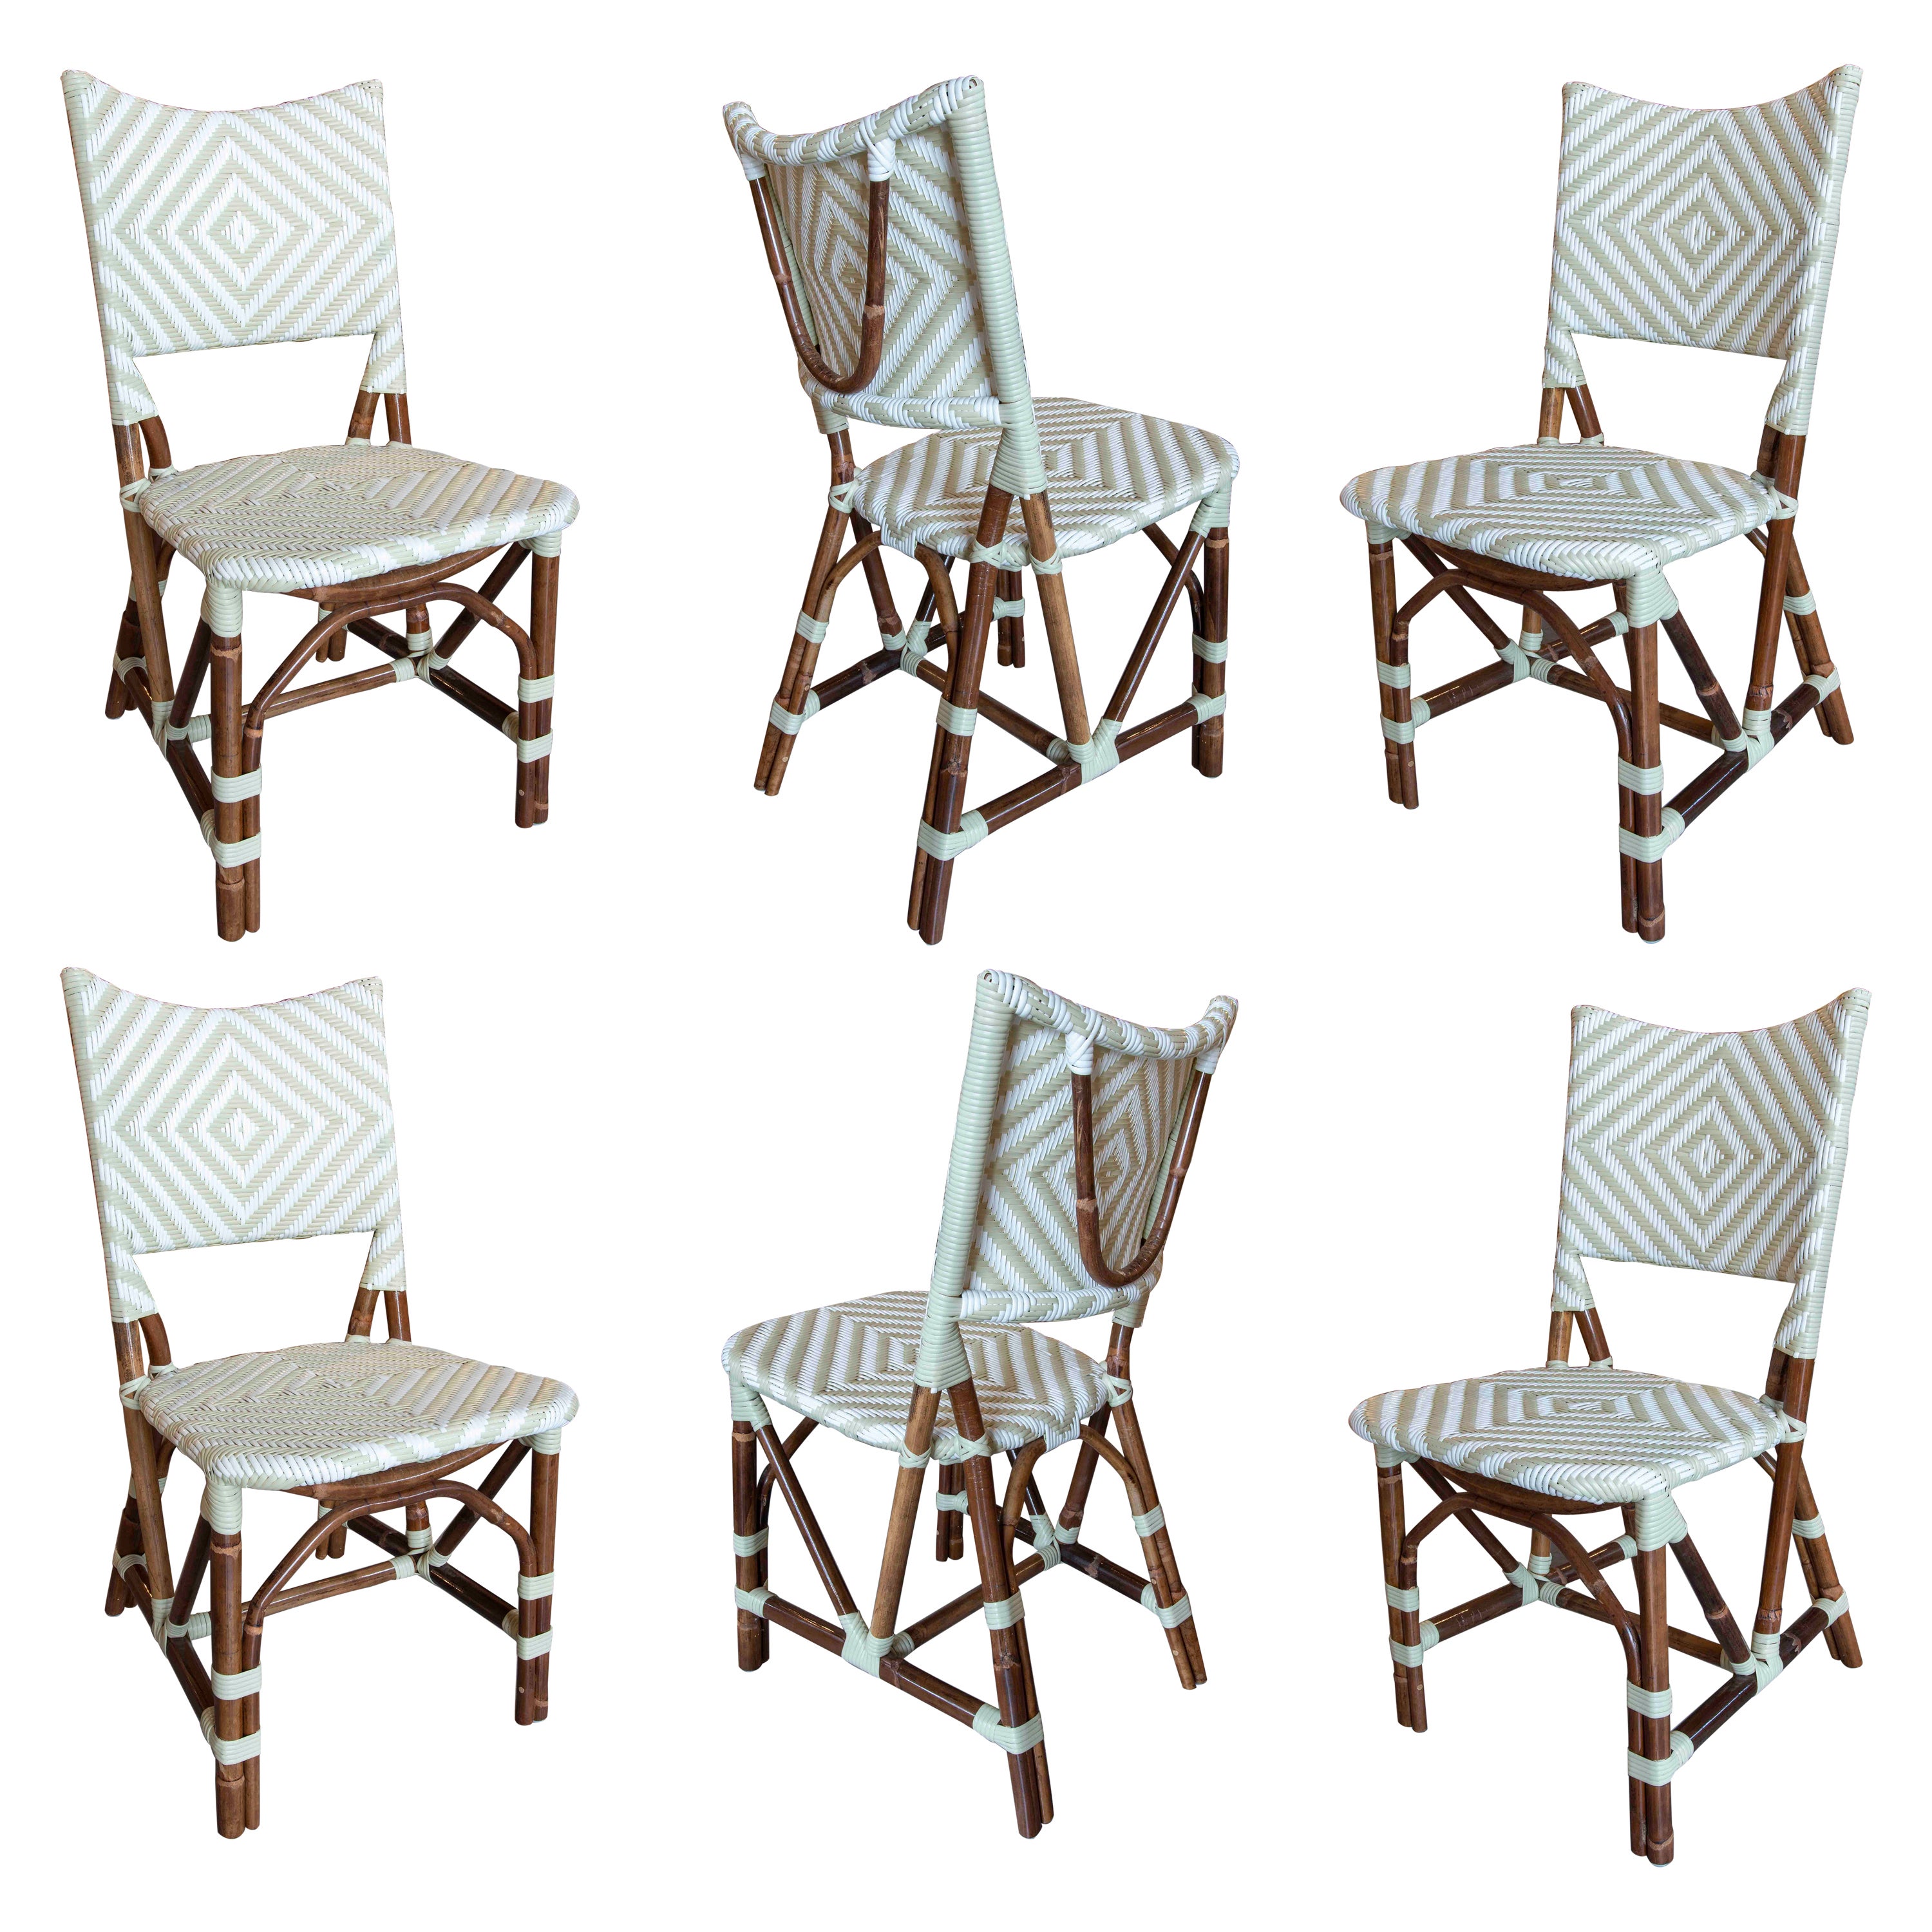 Set of six Chairs Made of Synthetic Material and Bamboo for Outdoor Use